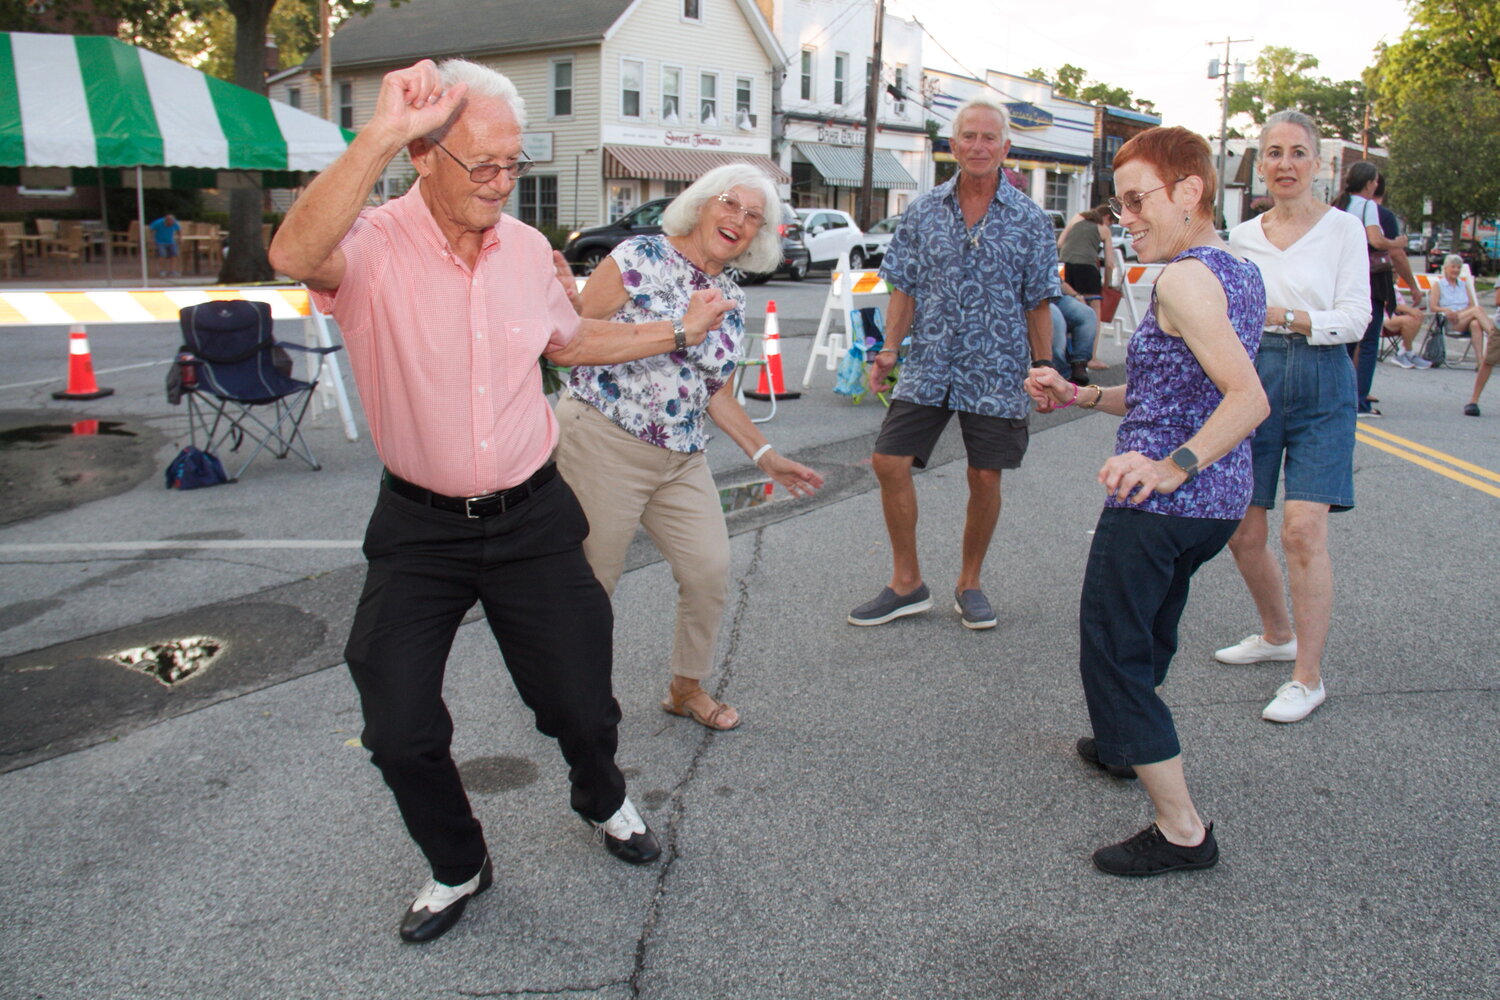 Tom Scott, left, Sophia and Fred Gordin, Sherry Bloom, and Ruth Eichacker danced the twist at Dancing in the Street.